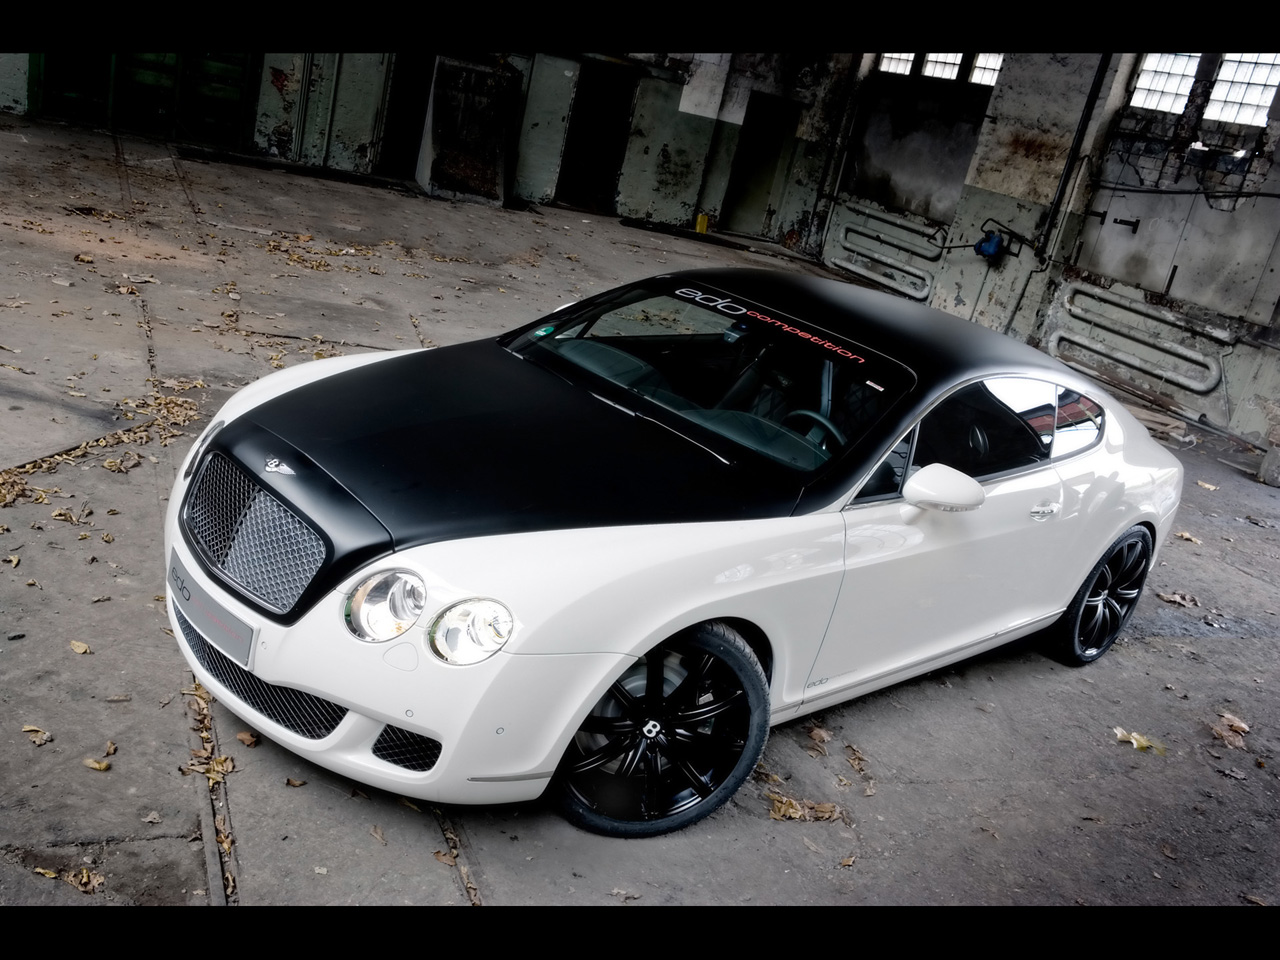 BENTLEY CONTINENTAL GT COUPE